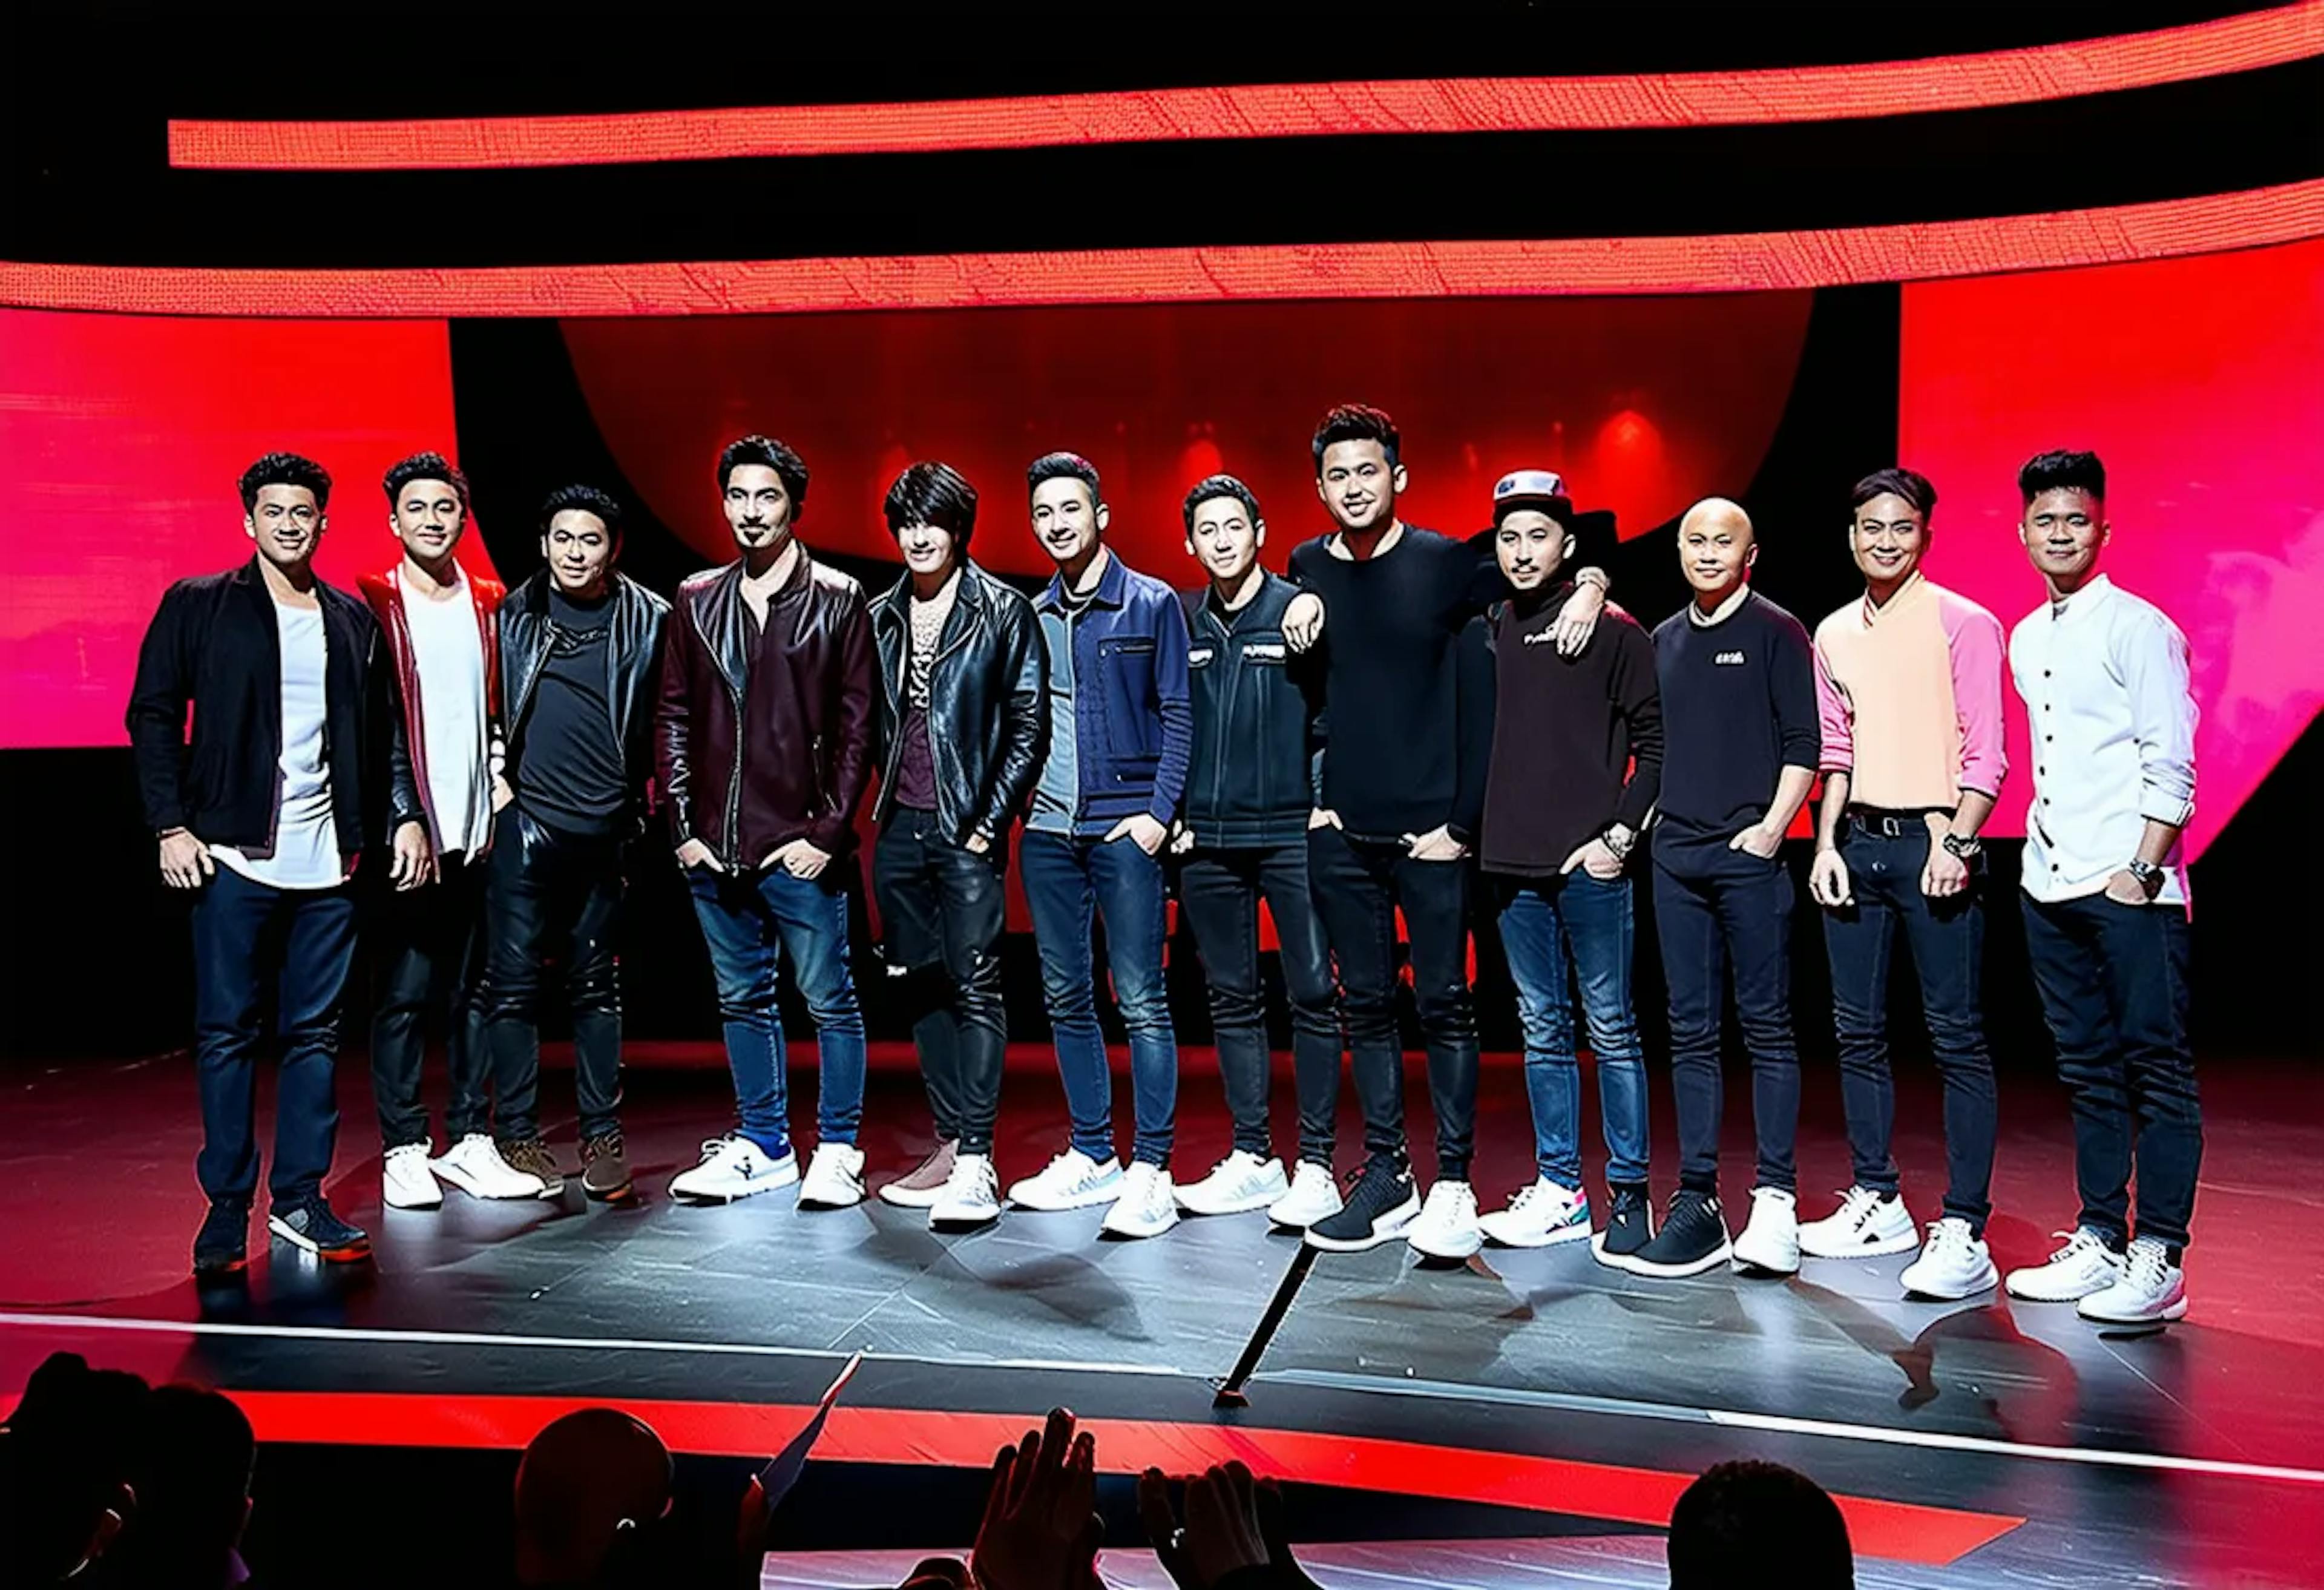 featured image - Blind Auditions of 'The Voice' Expose Gender Bias in Hiring Practices